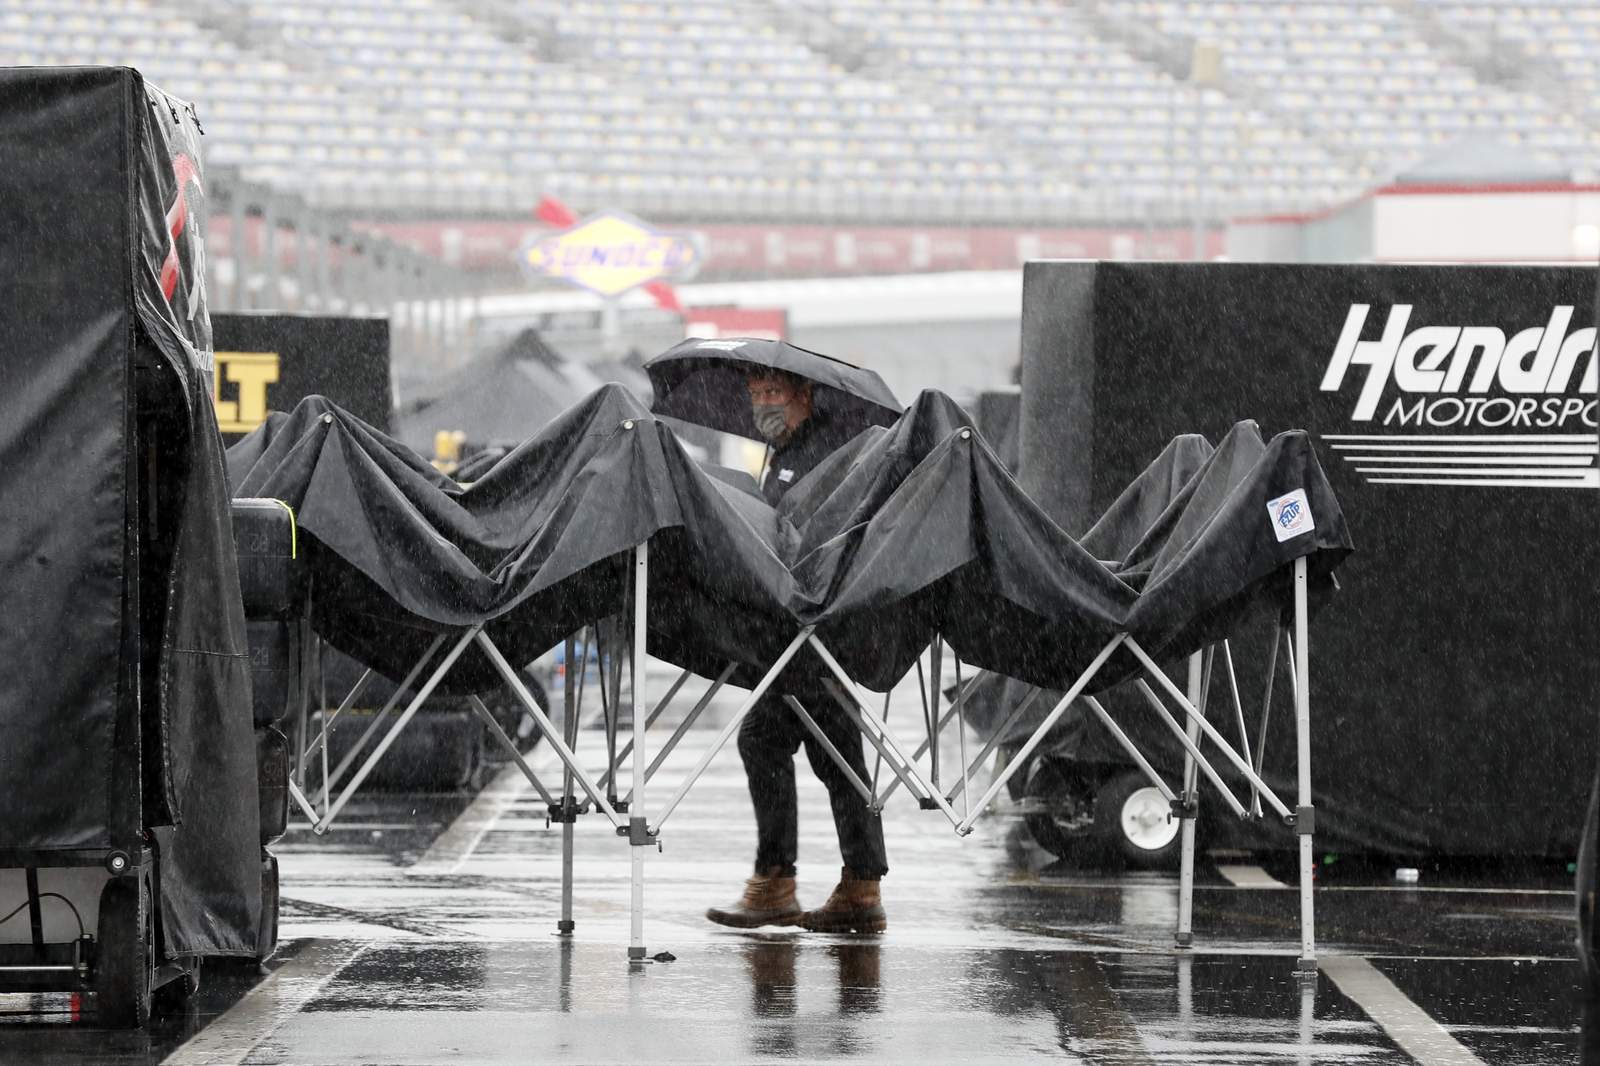 NASCAR Cup race in Charlotte pushed back day because of rain